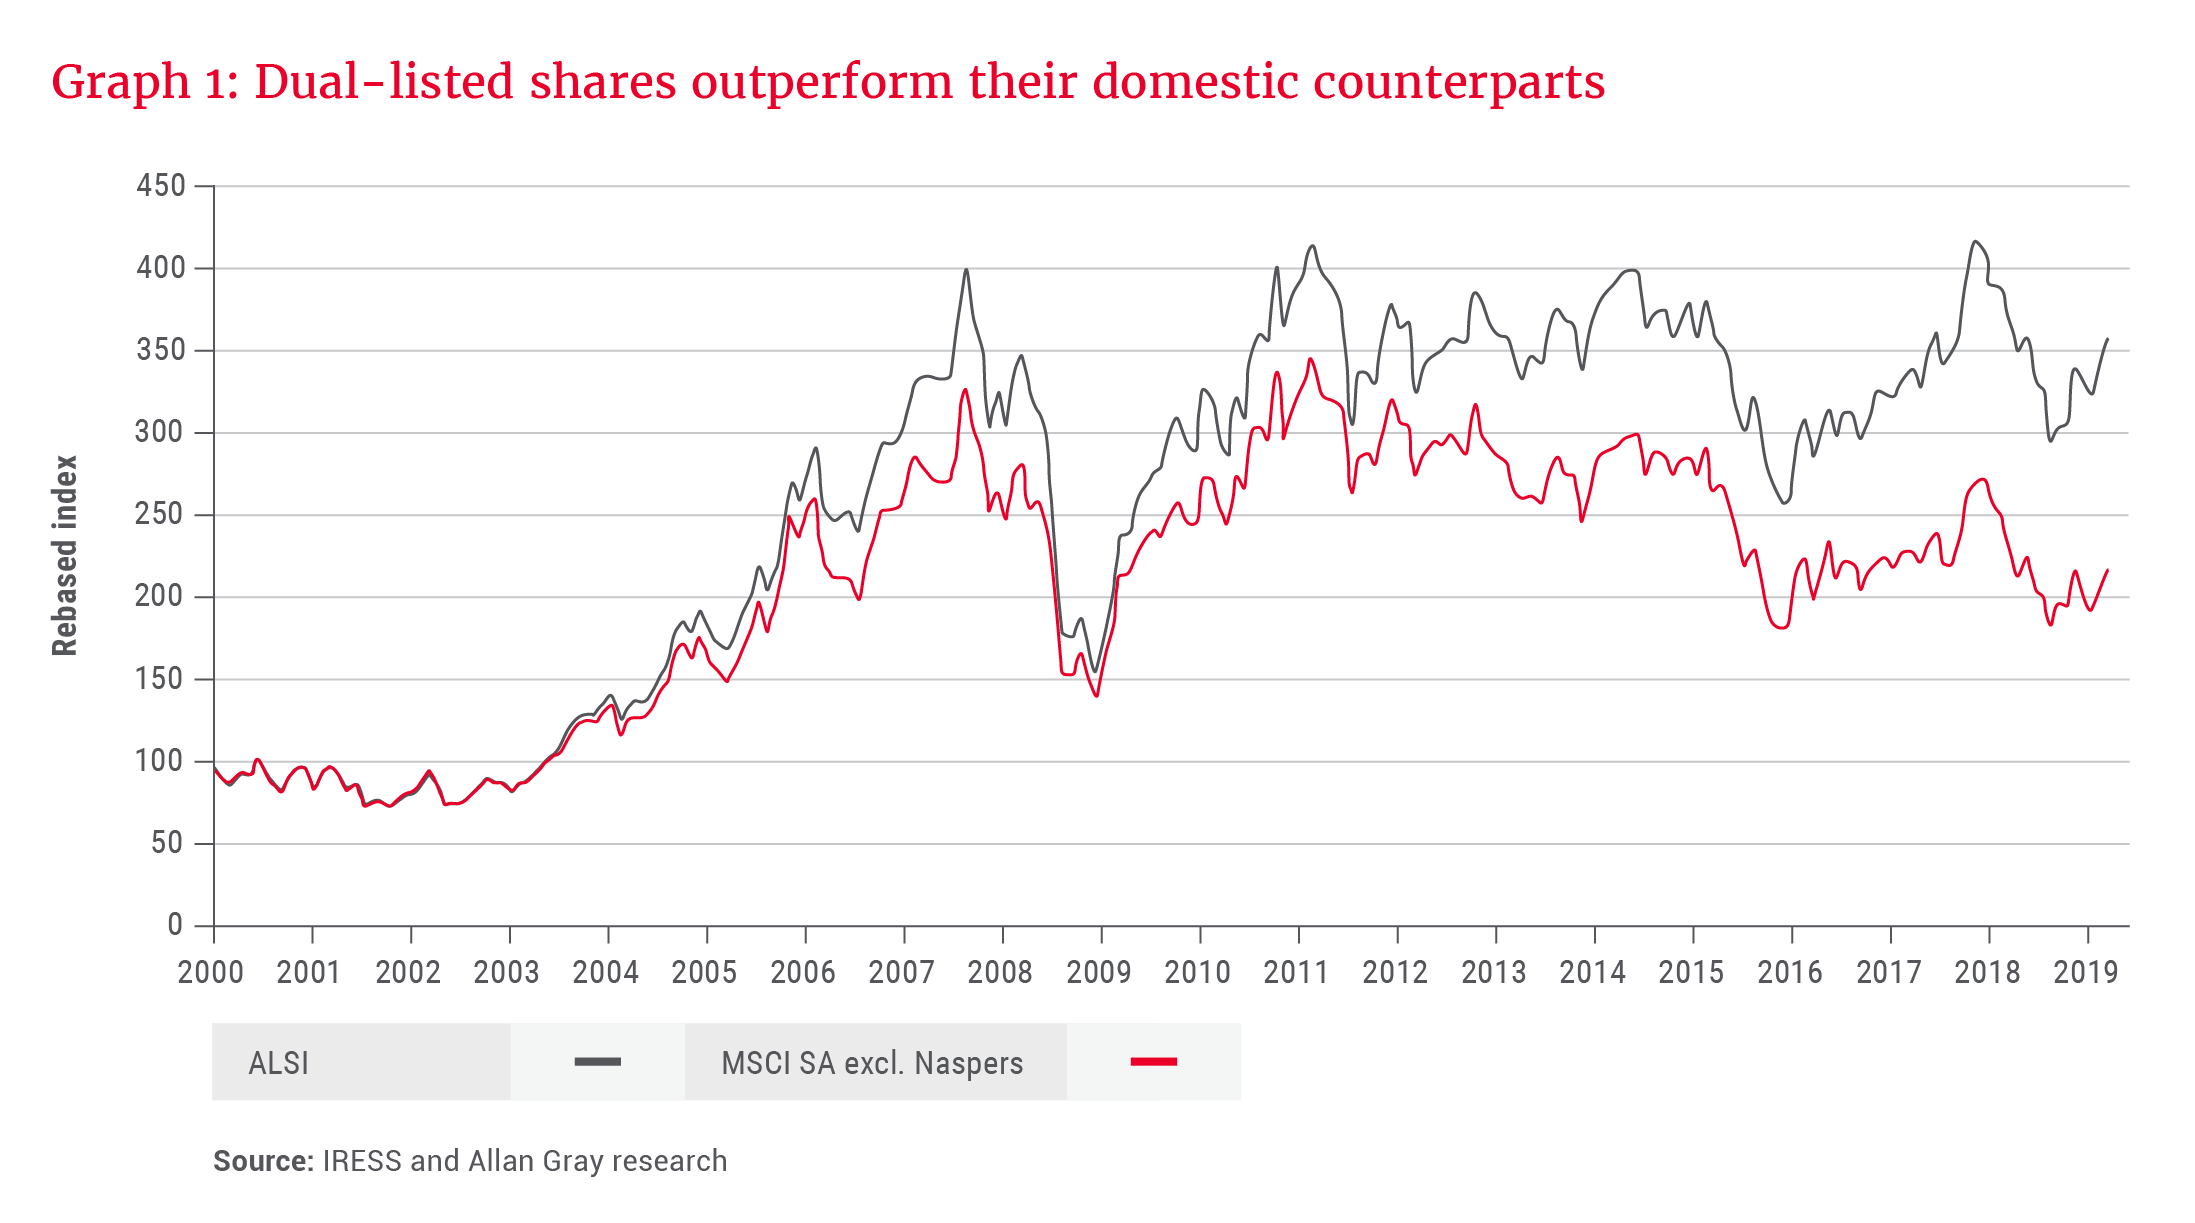 Dual-listed shares outperform their counterparts - Allan Gray